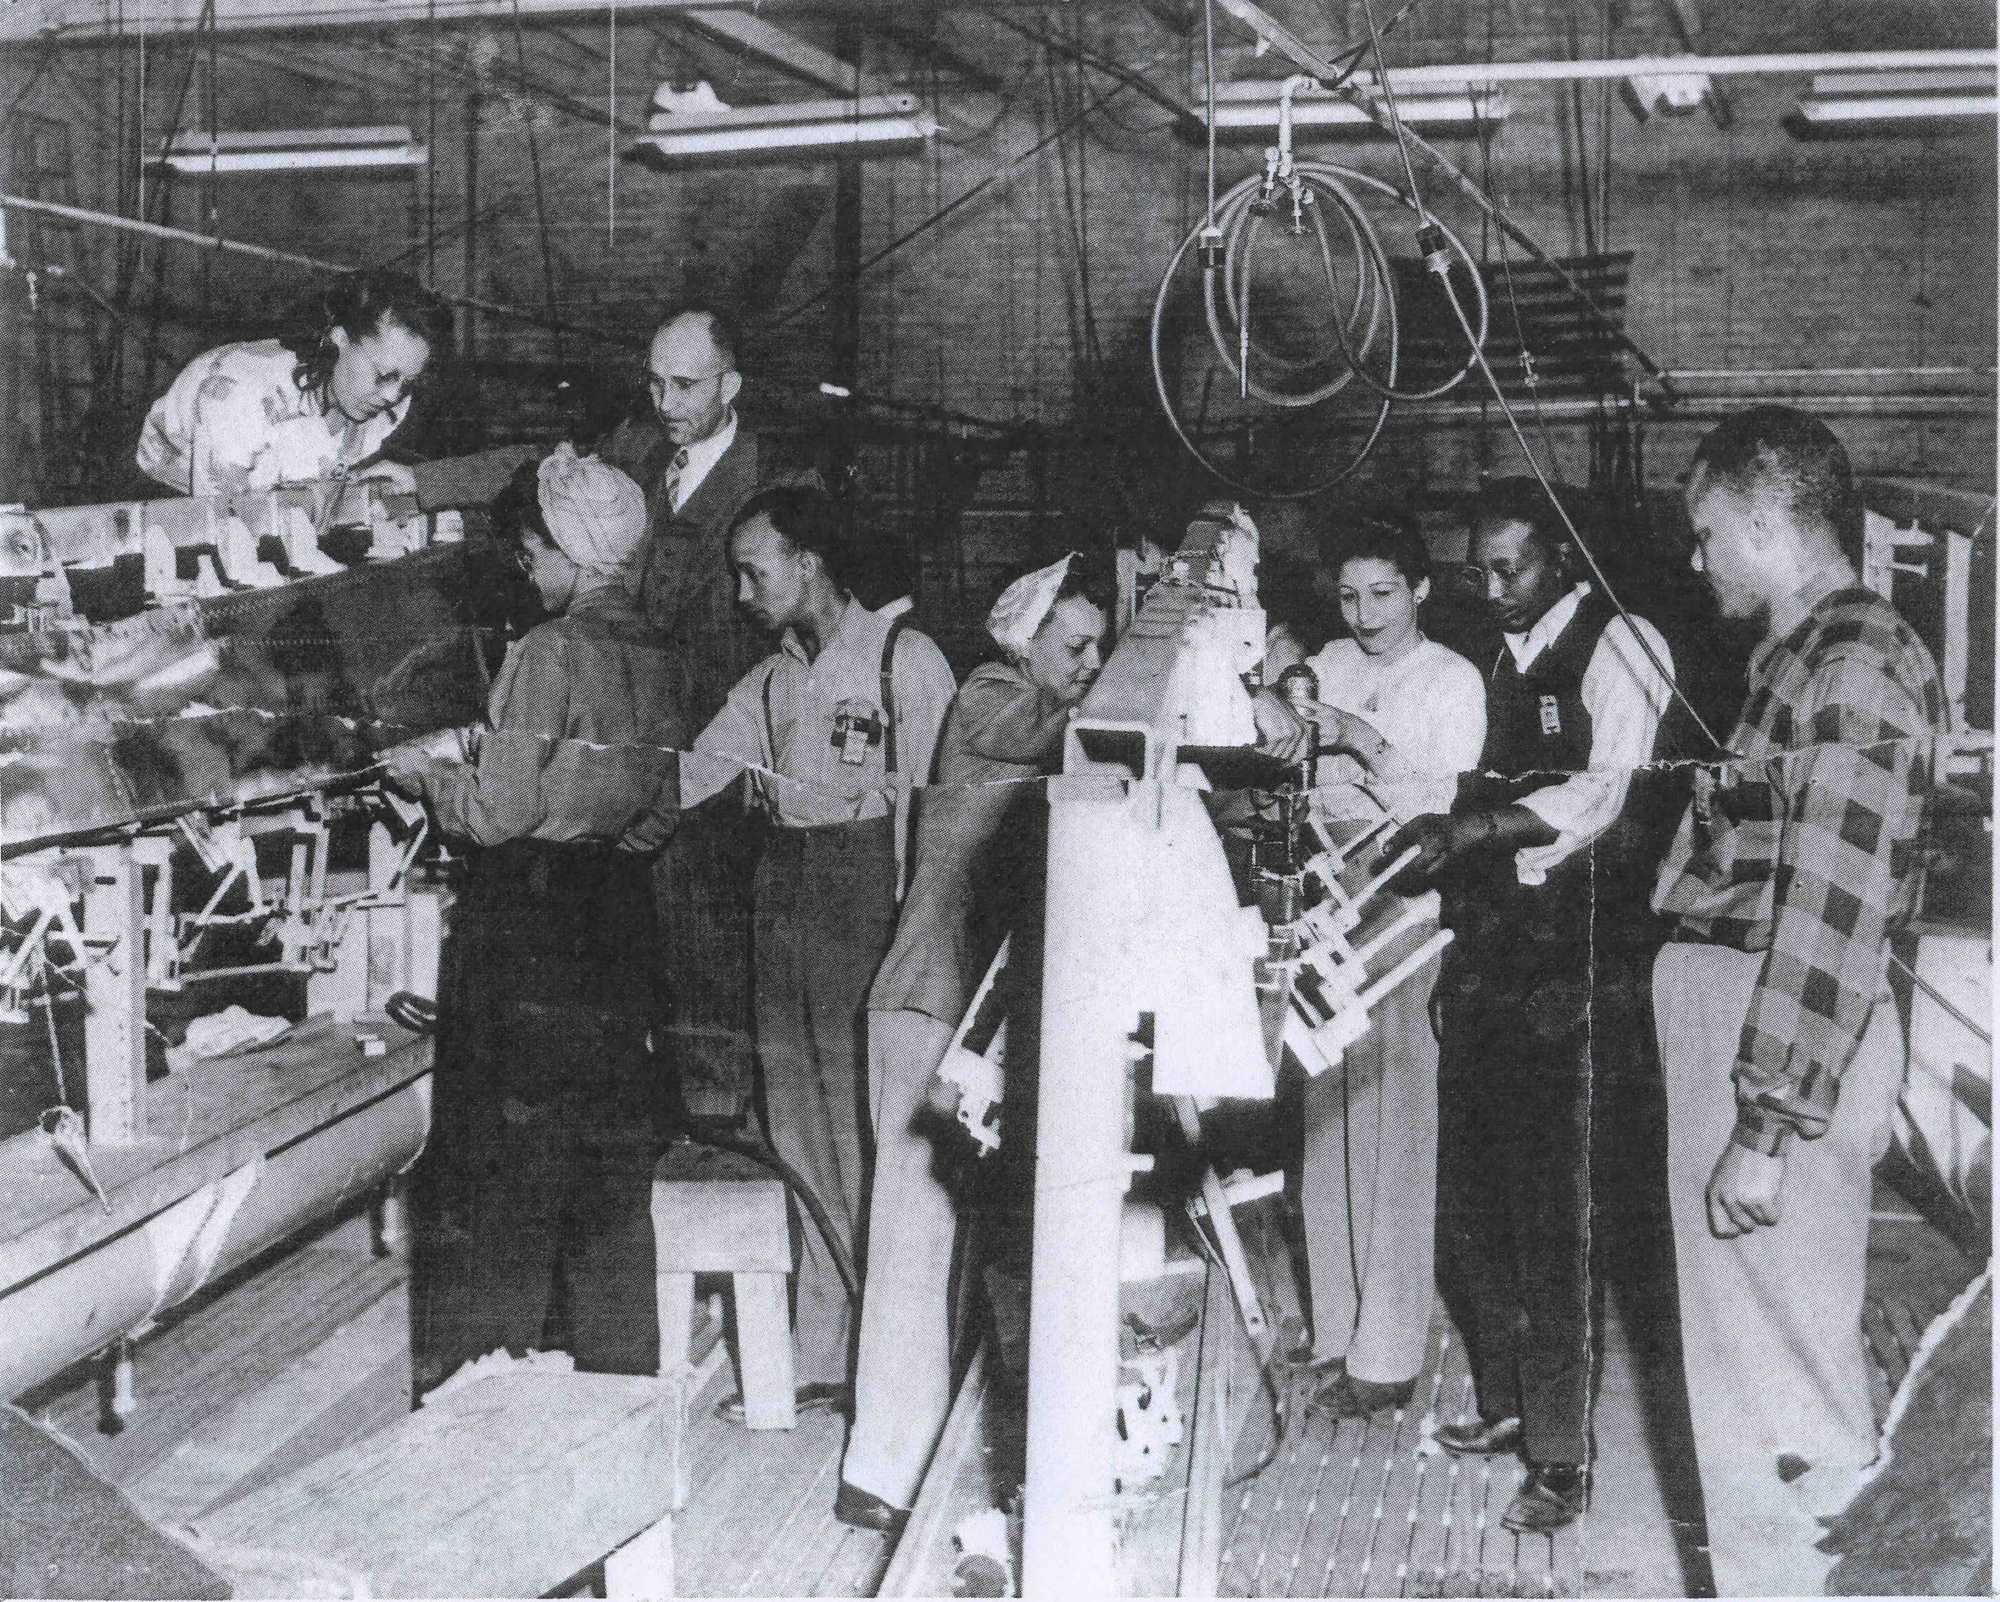 Photograph of Workers building panels for Douglas A-26 Invader aircraft